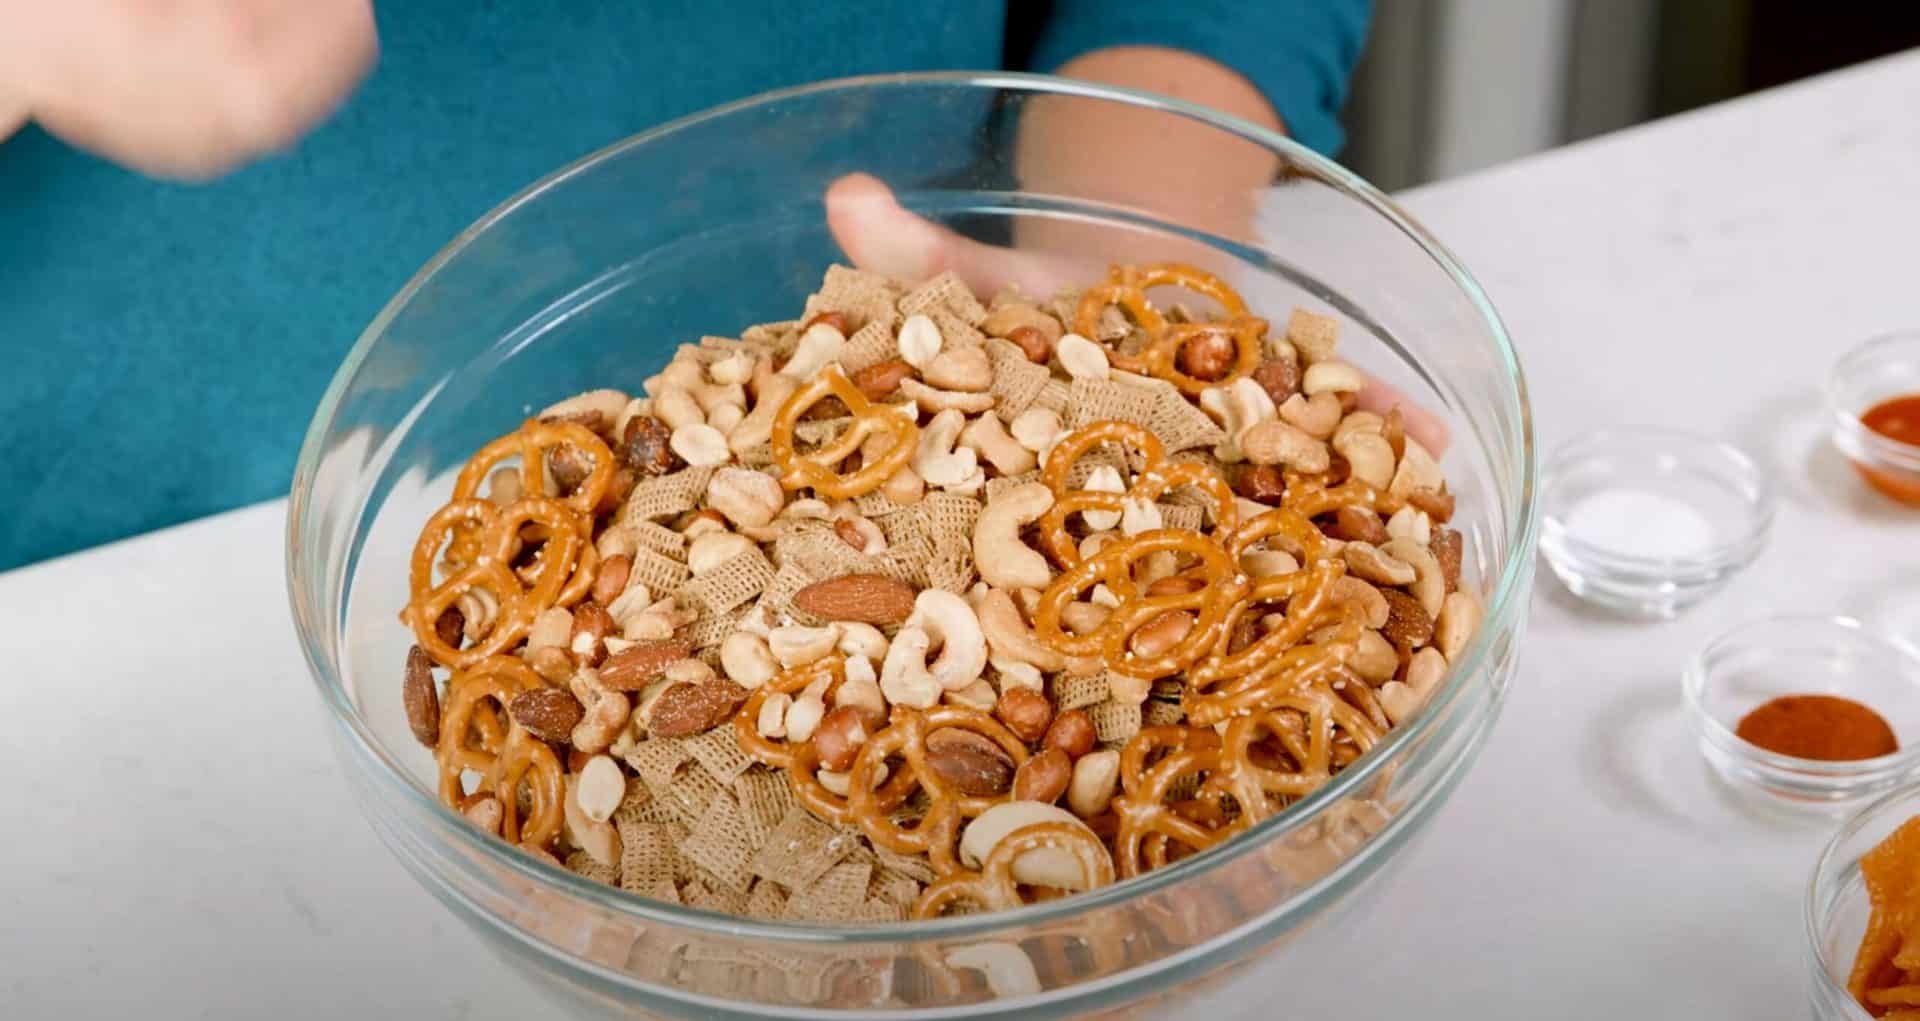 Party Chex Mix - Mix